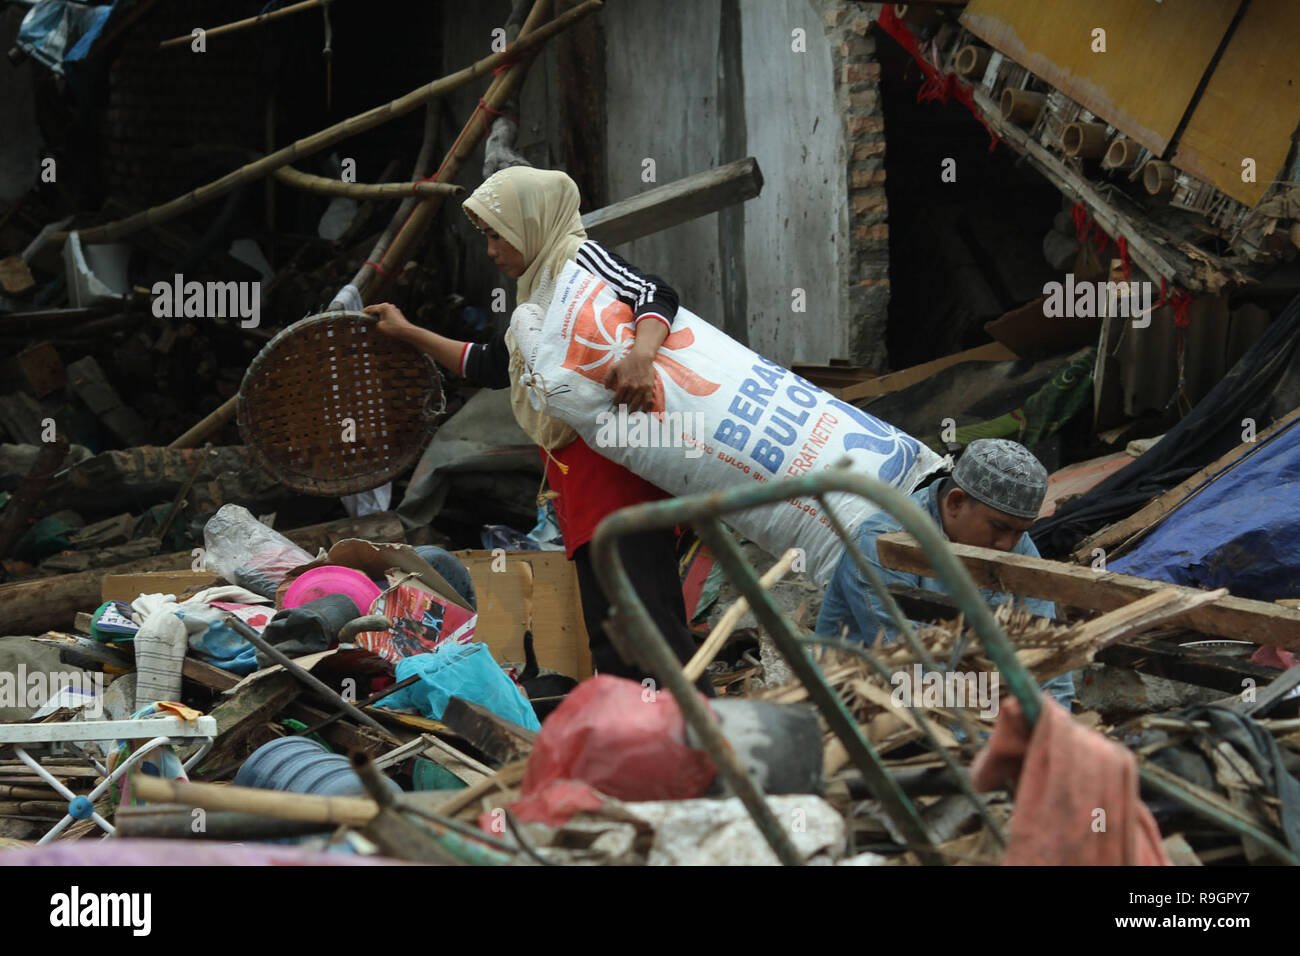 South Lampung, Lampung, Indonesia. 25th Dec, 2018. LAMPUNG, INDONESIA - DECEMBER 25 : People searching something at his house after the tsunami hit at South Lampung on Decemebr 25, 2018 in Pandegralang regency, Banten Province, Indonesia.A tsunami struck Indonesia's Sunda Strait, the expanse between the islands of Java and Sumatra, on the night of December 22, local time. Credit: ZUMA Press, Inc./Alamy Live News Stock Photo